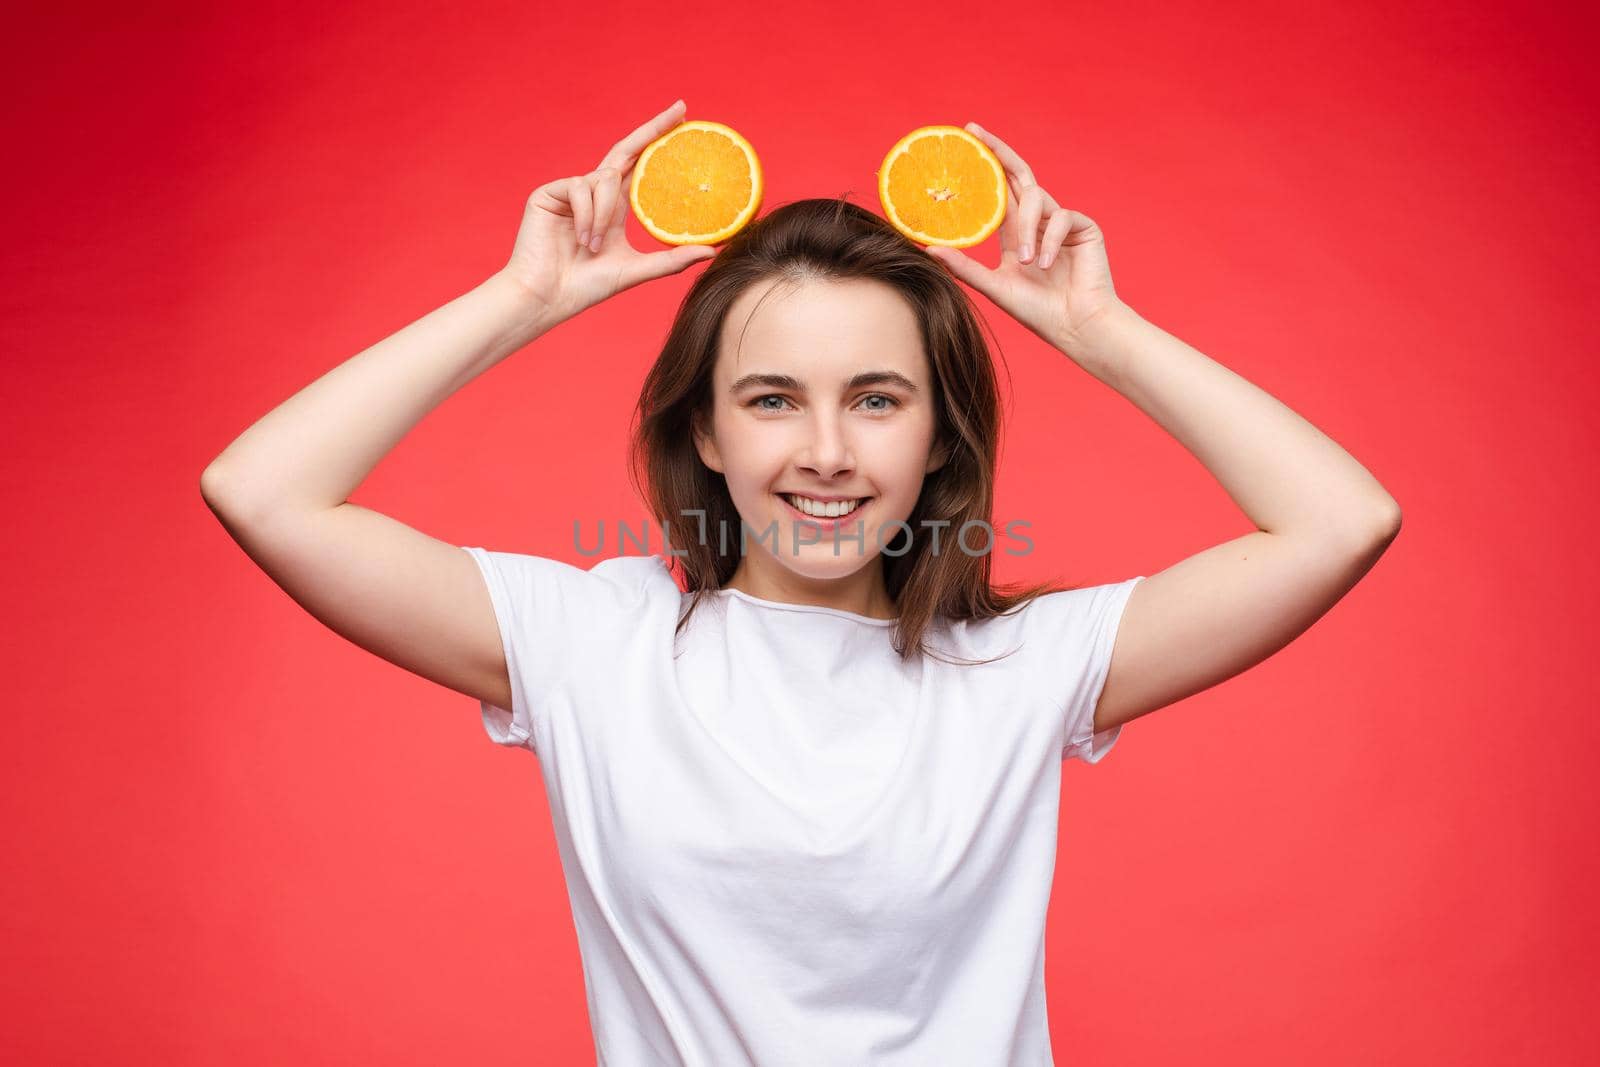 Studio headshot of young funny brunette with hairstyle and red lips holding halved oranges on eyes against bright yellow background.